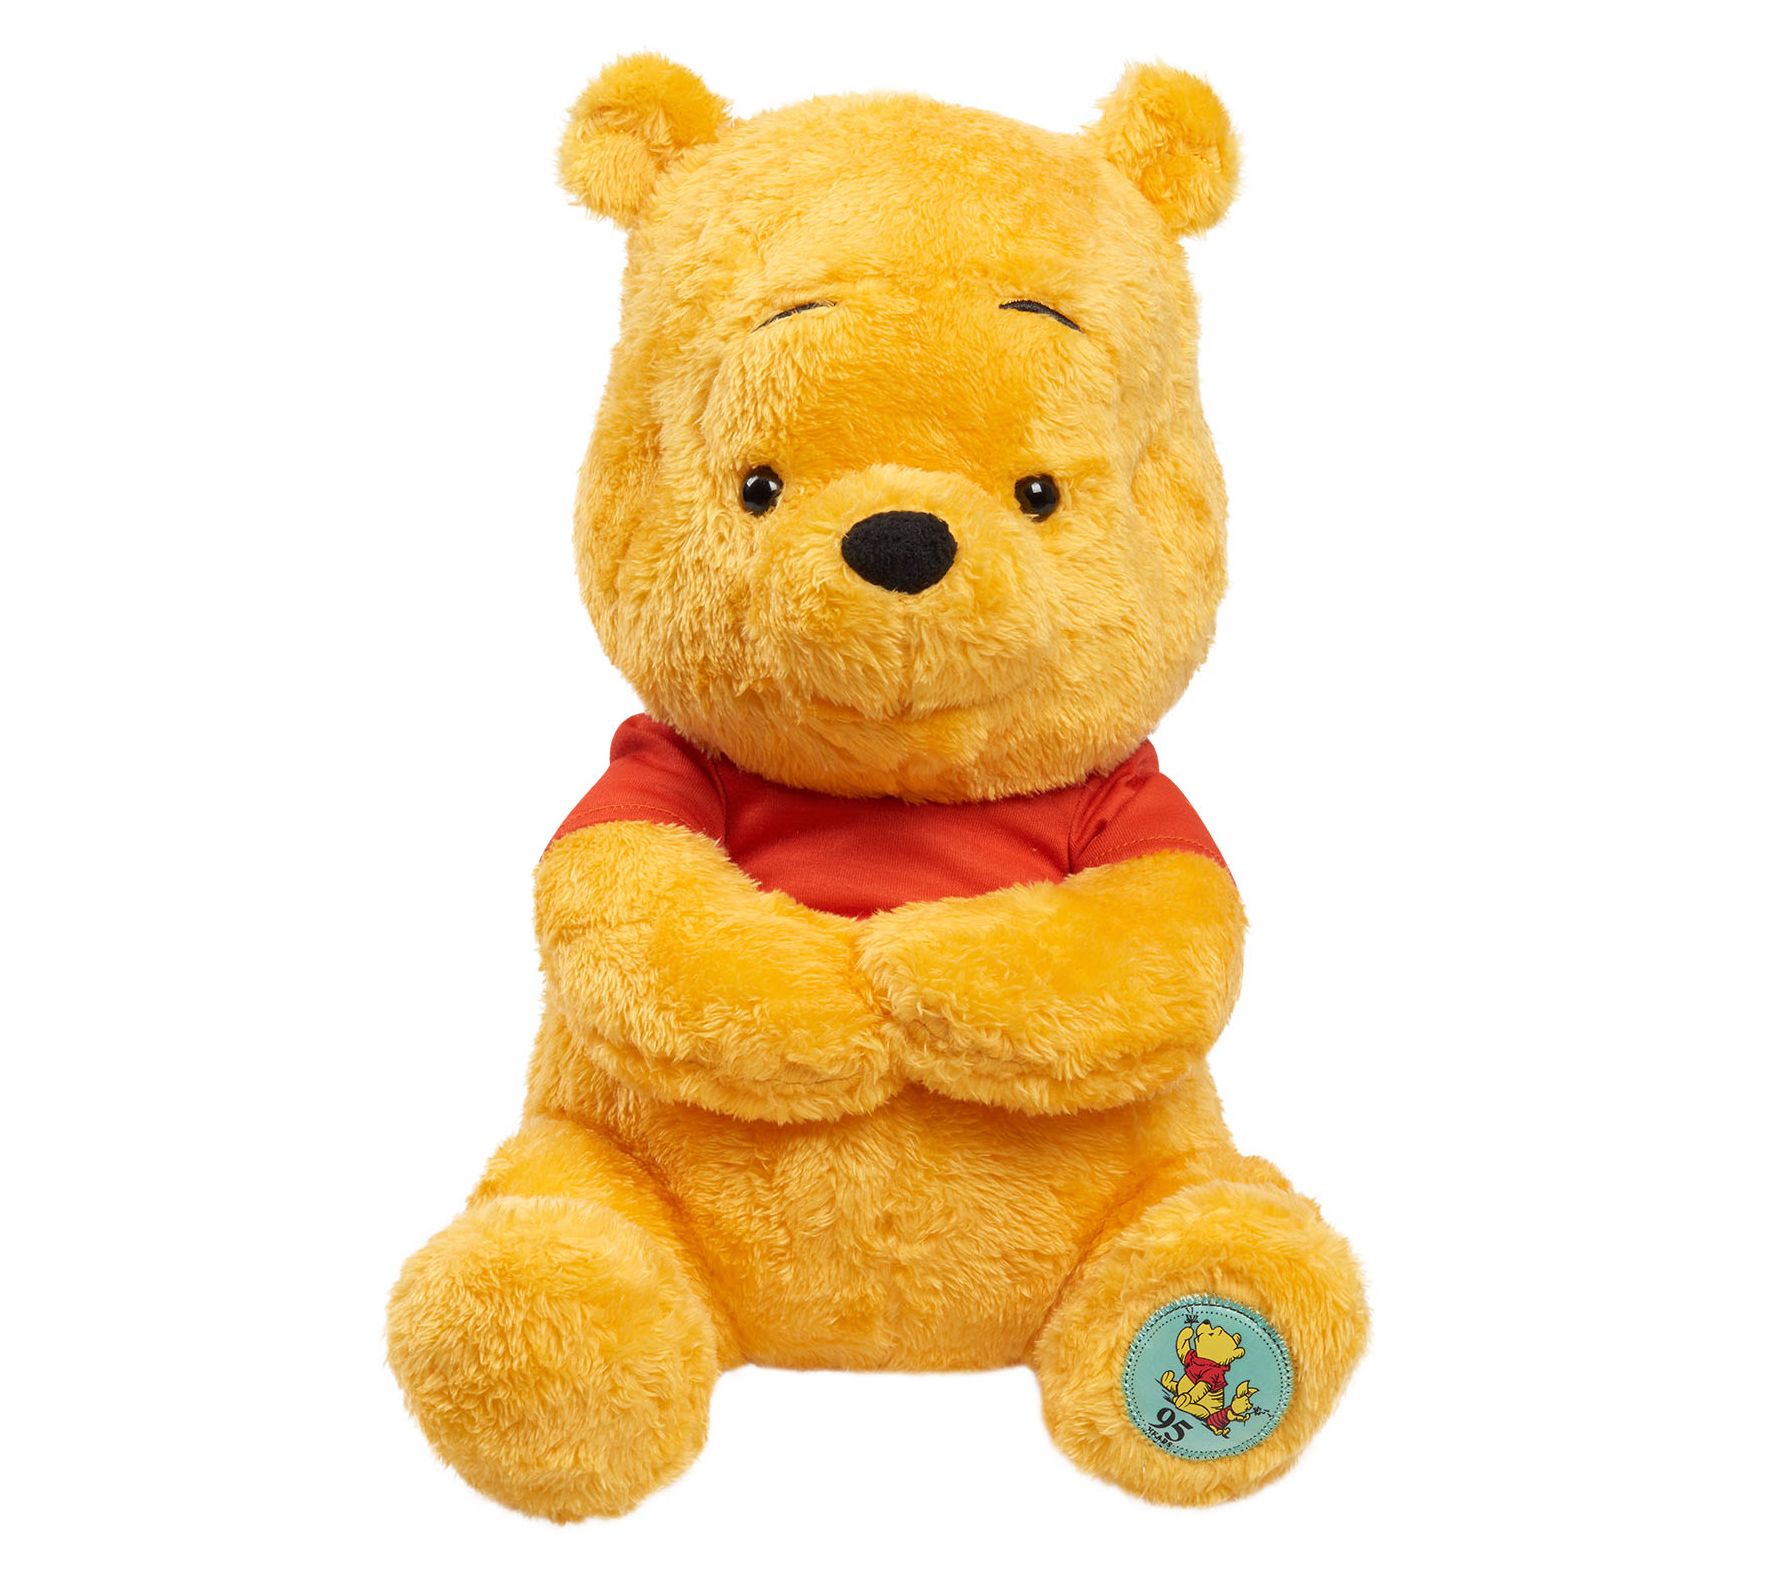 Winnie The Pooh Original Vintage Plush Teddy.Comment Of Choice When Purchasing 